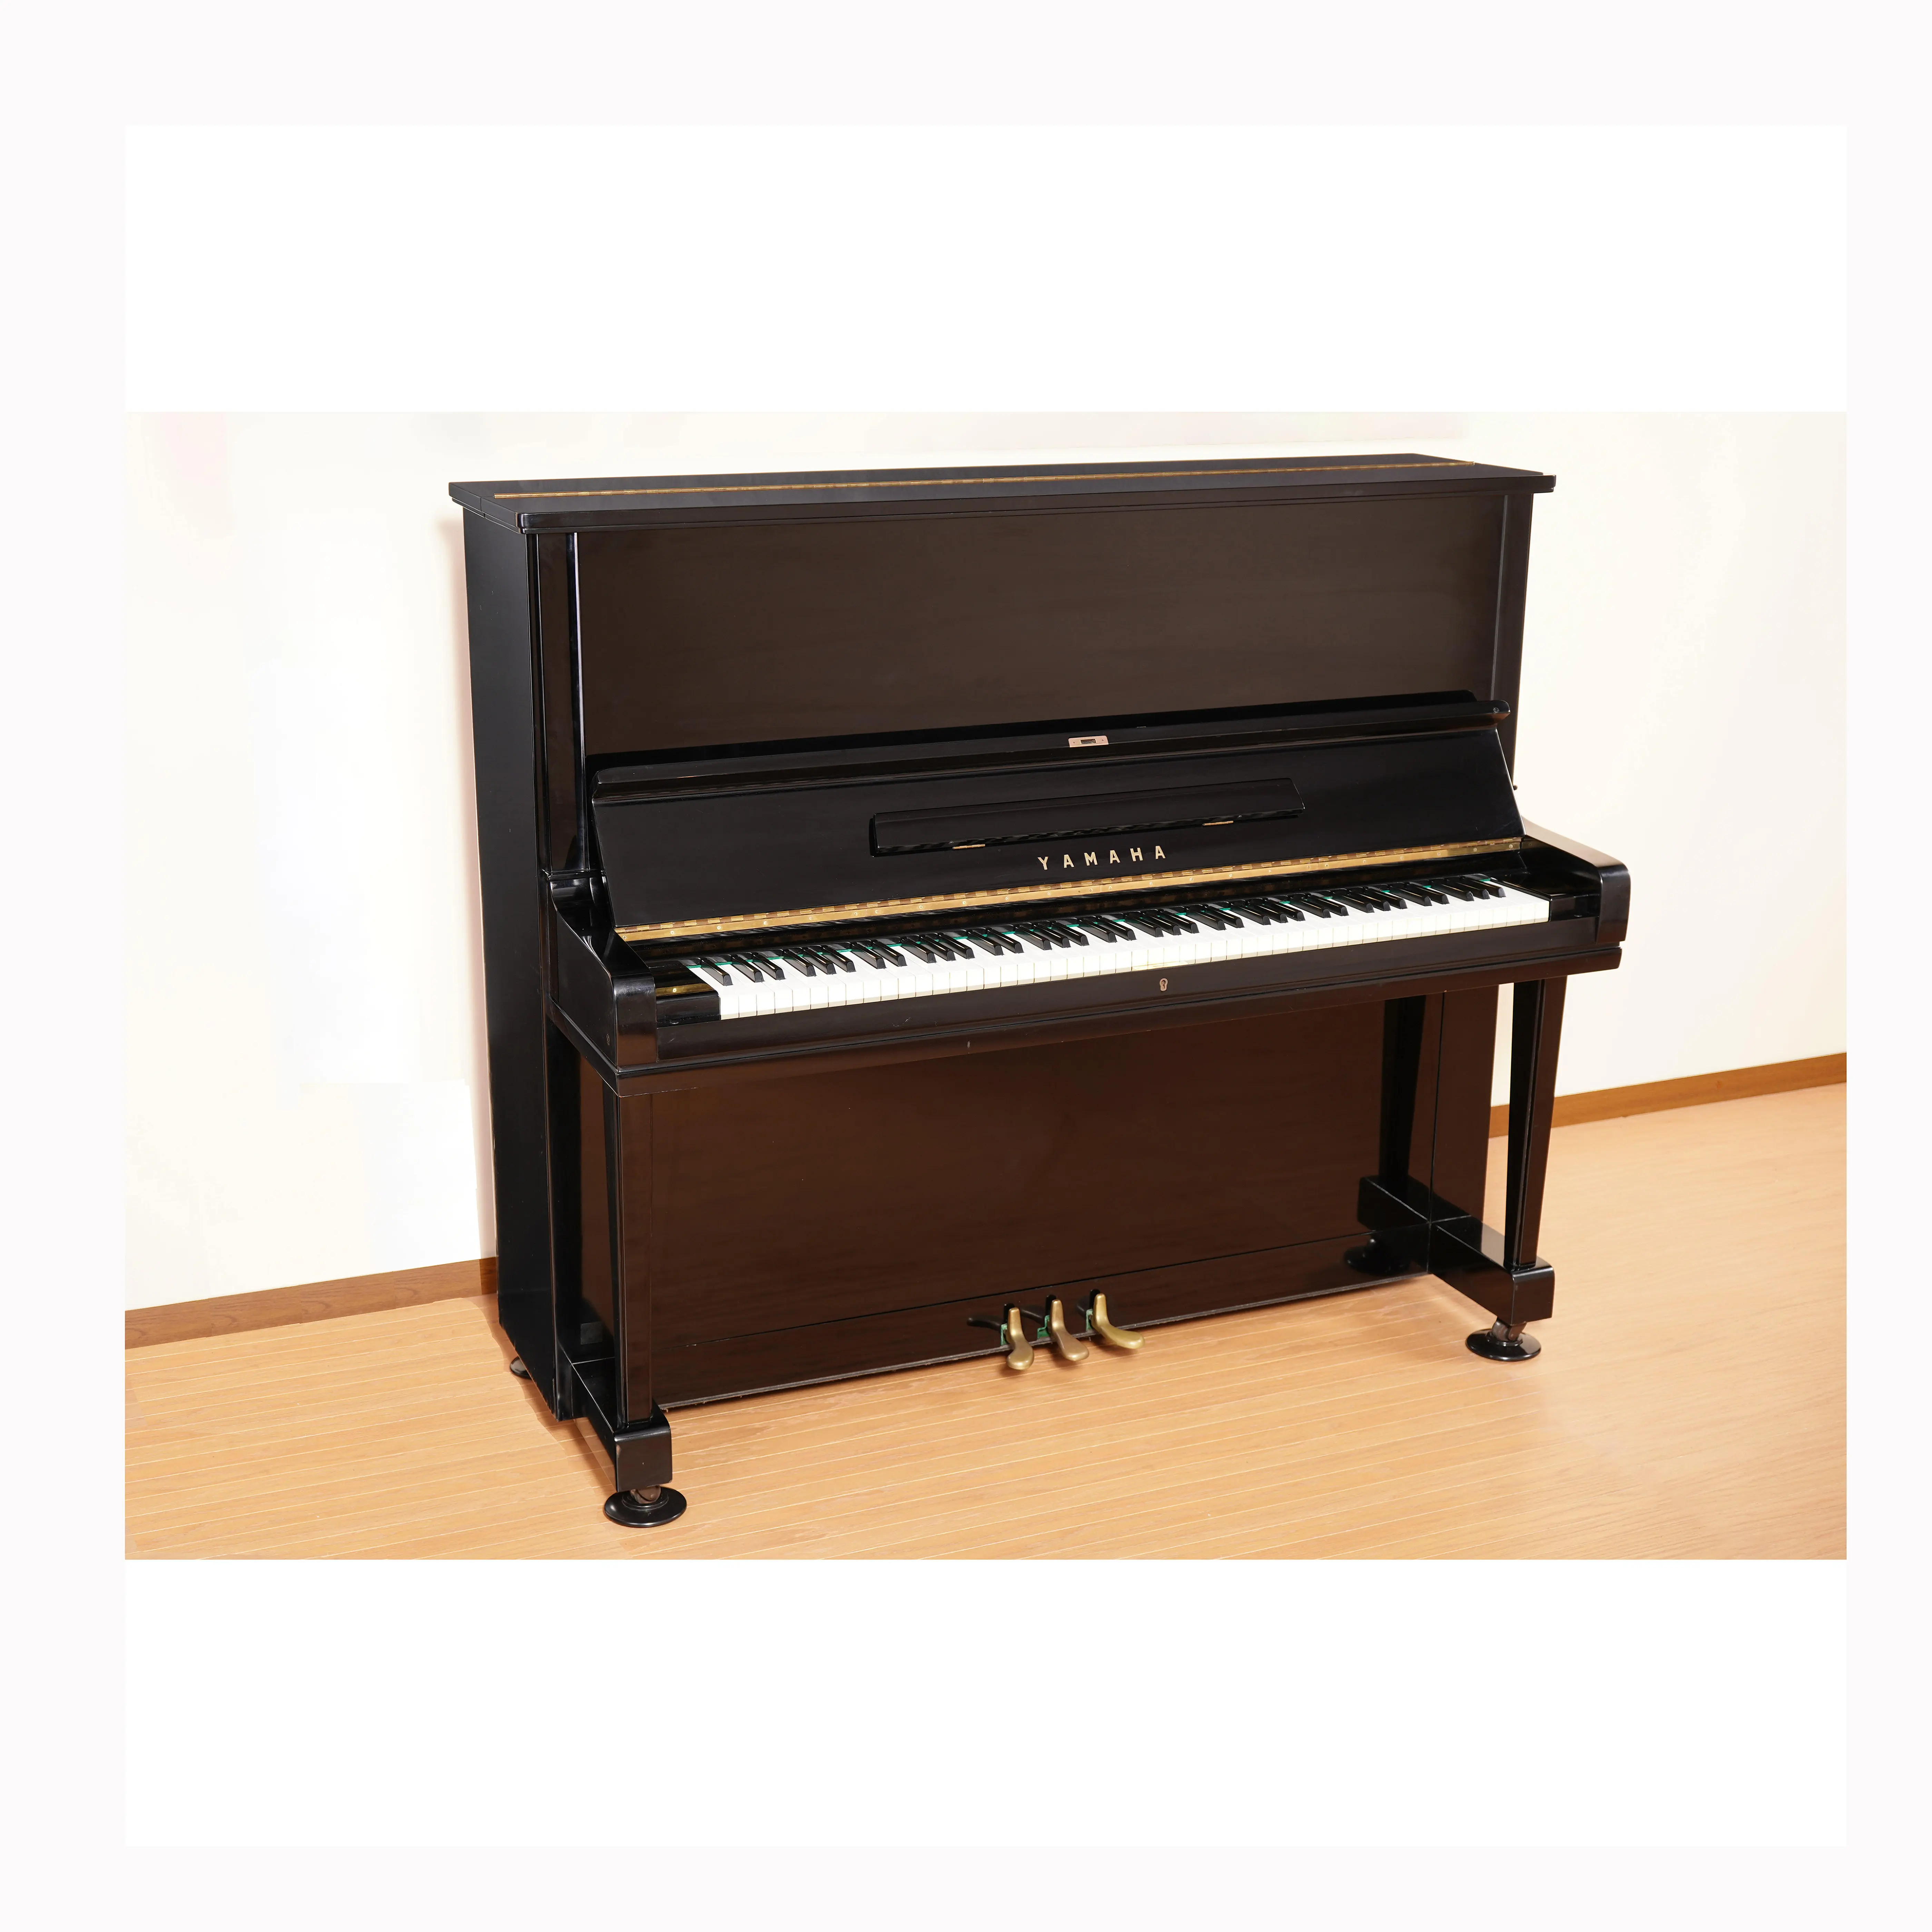 High quality second hand used piano professional music instruments